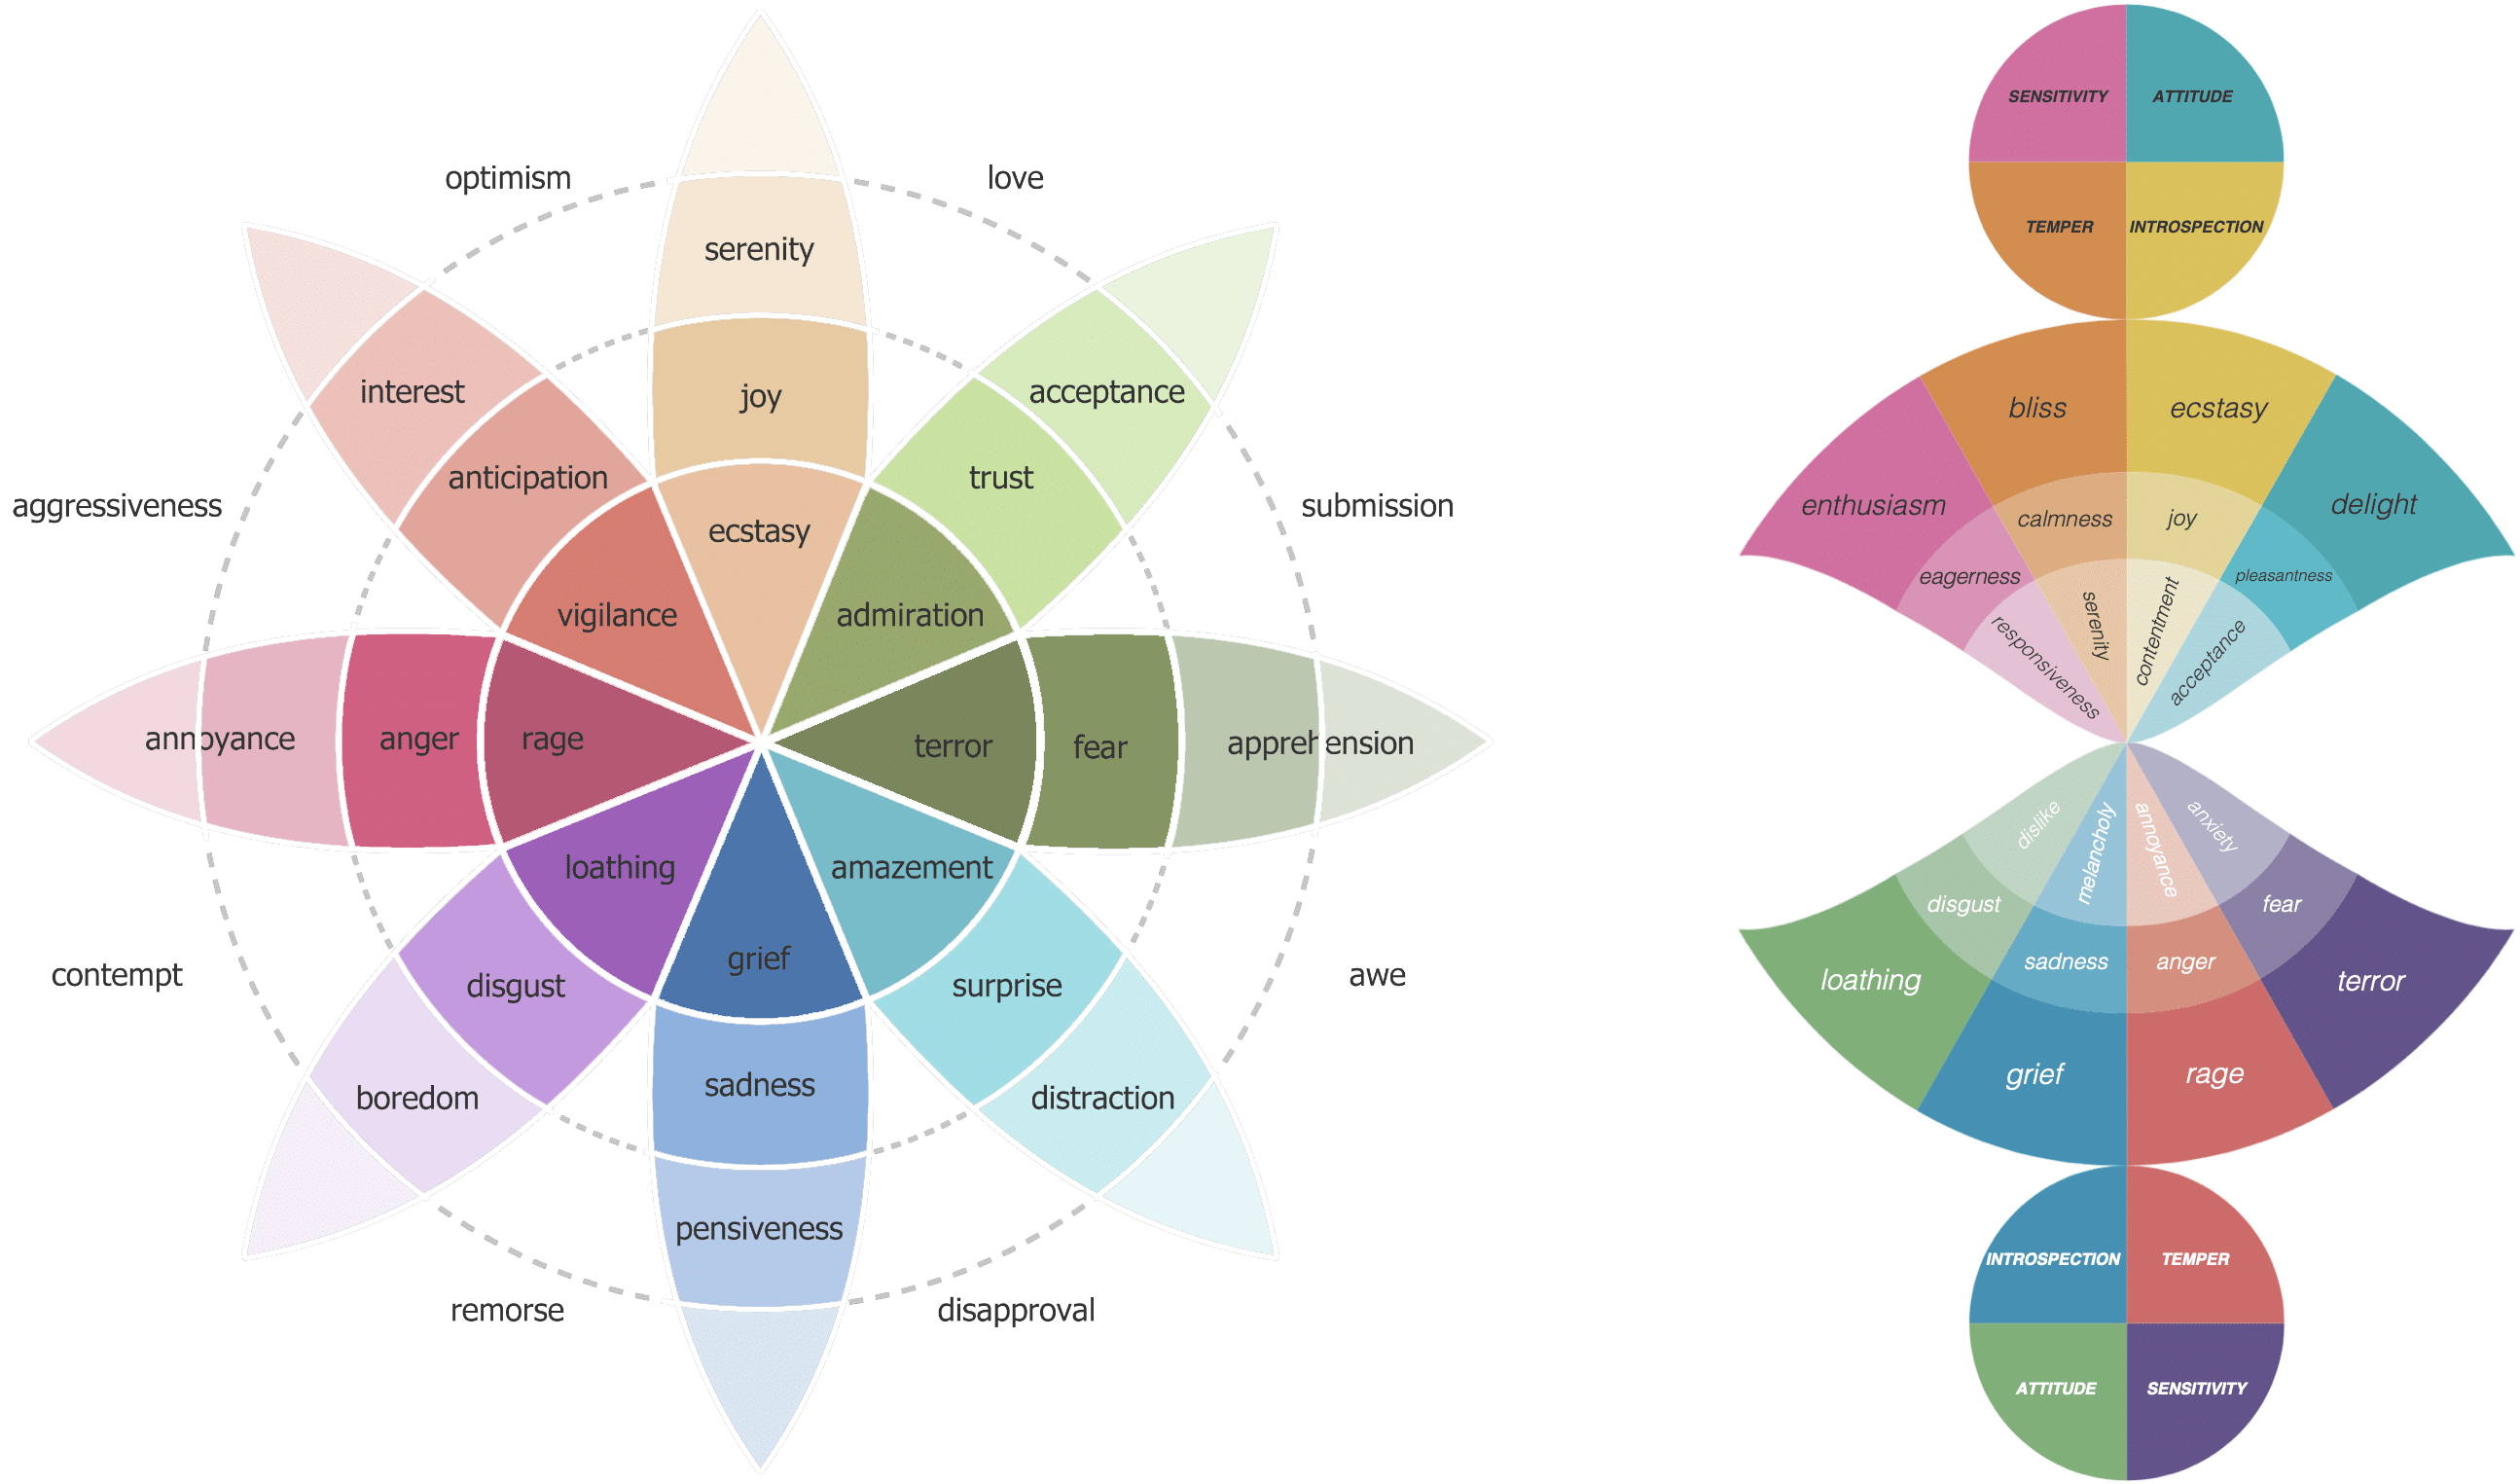 Plutchik's Wheel of Emotion and Cambria's Hourglass of Emotions